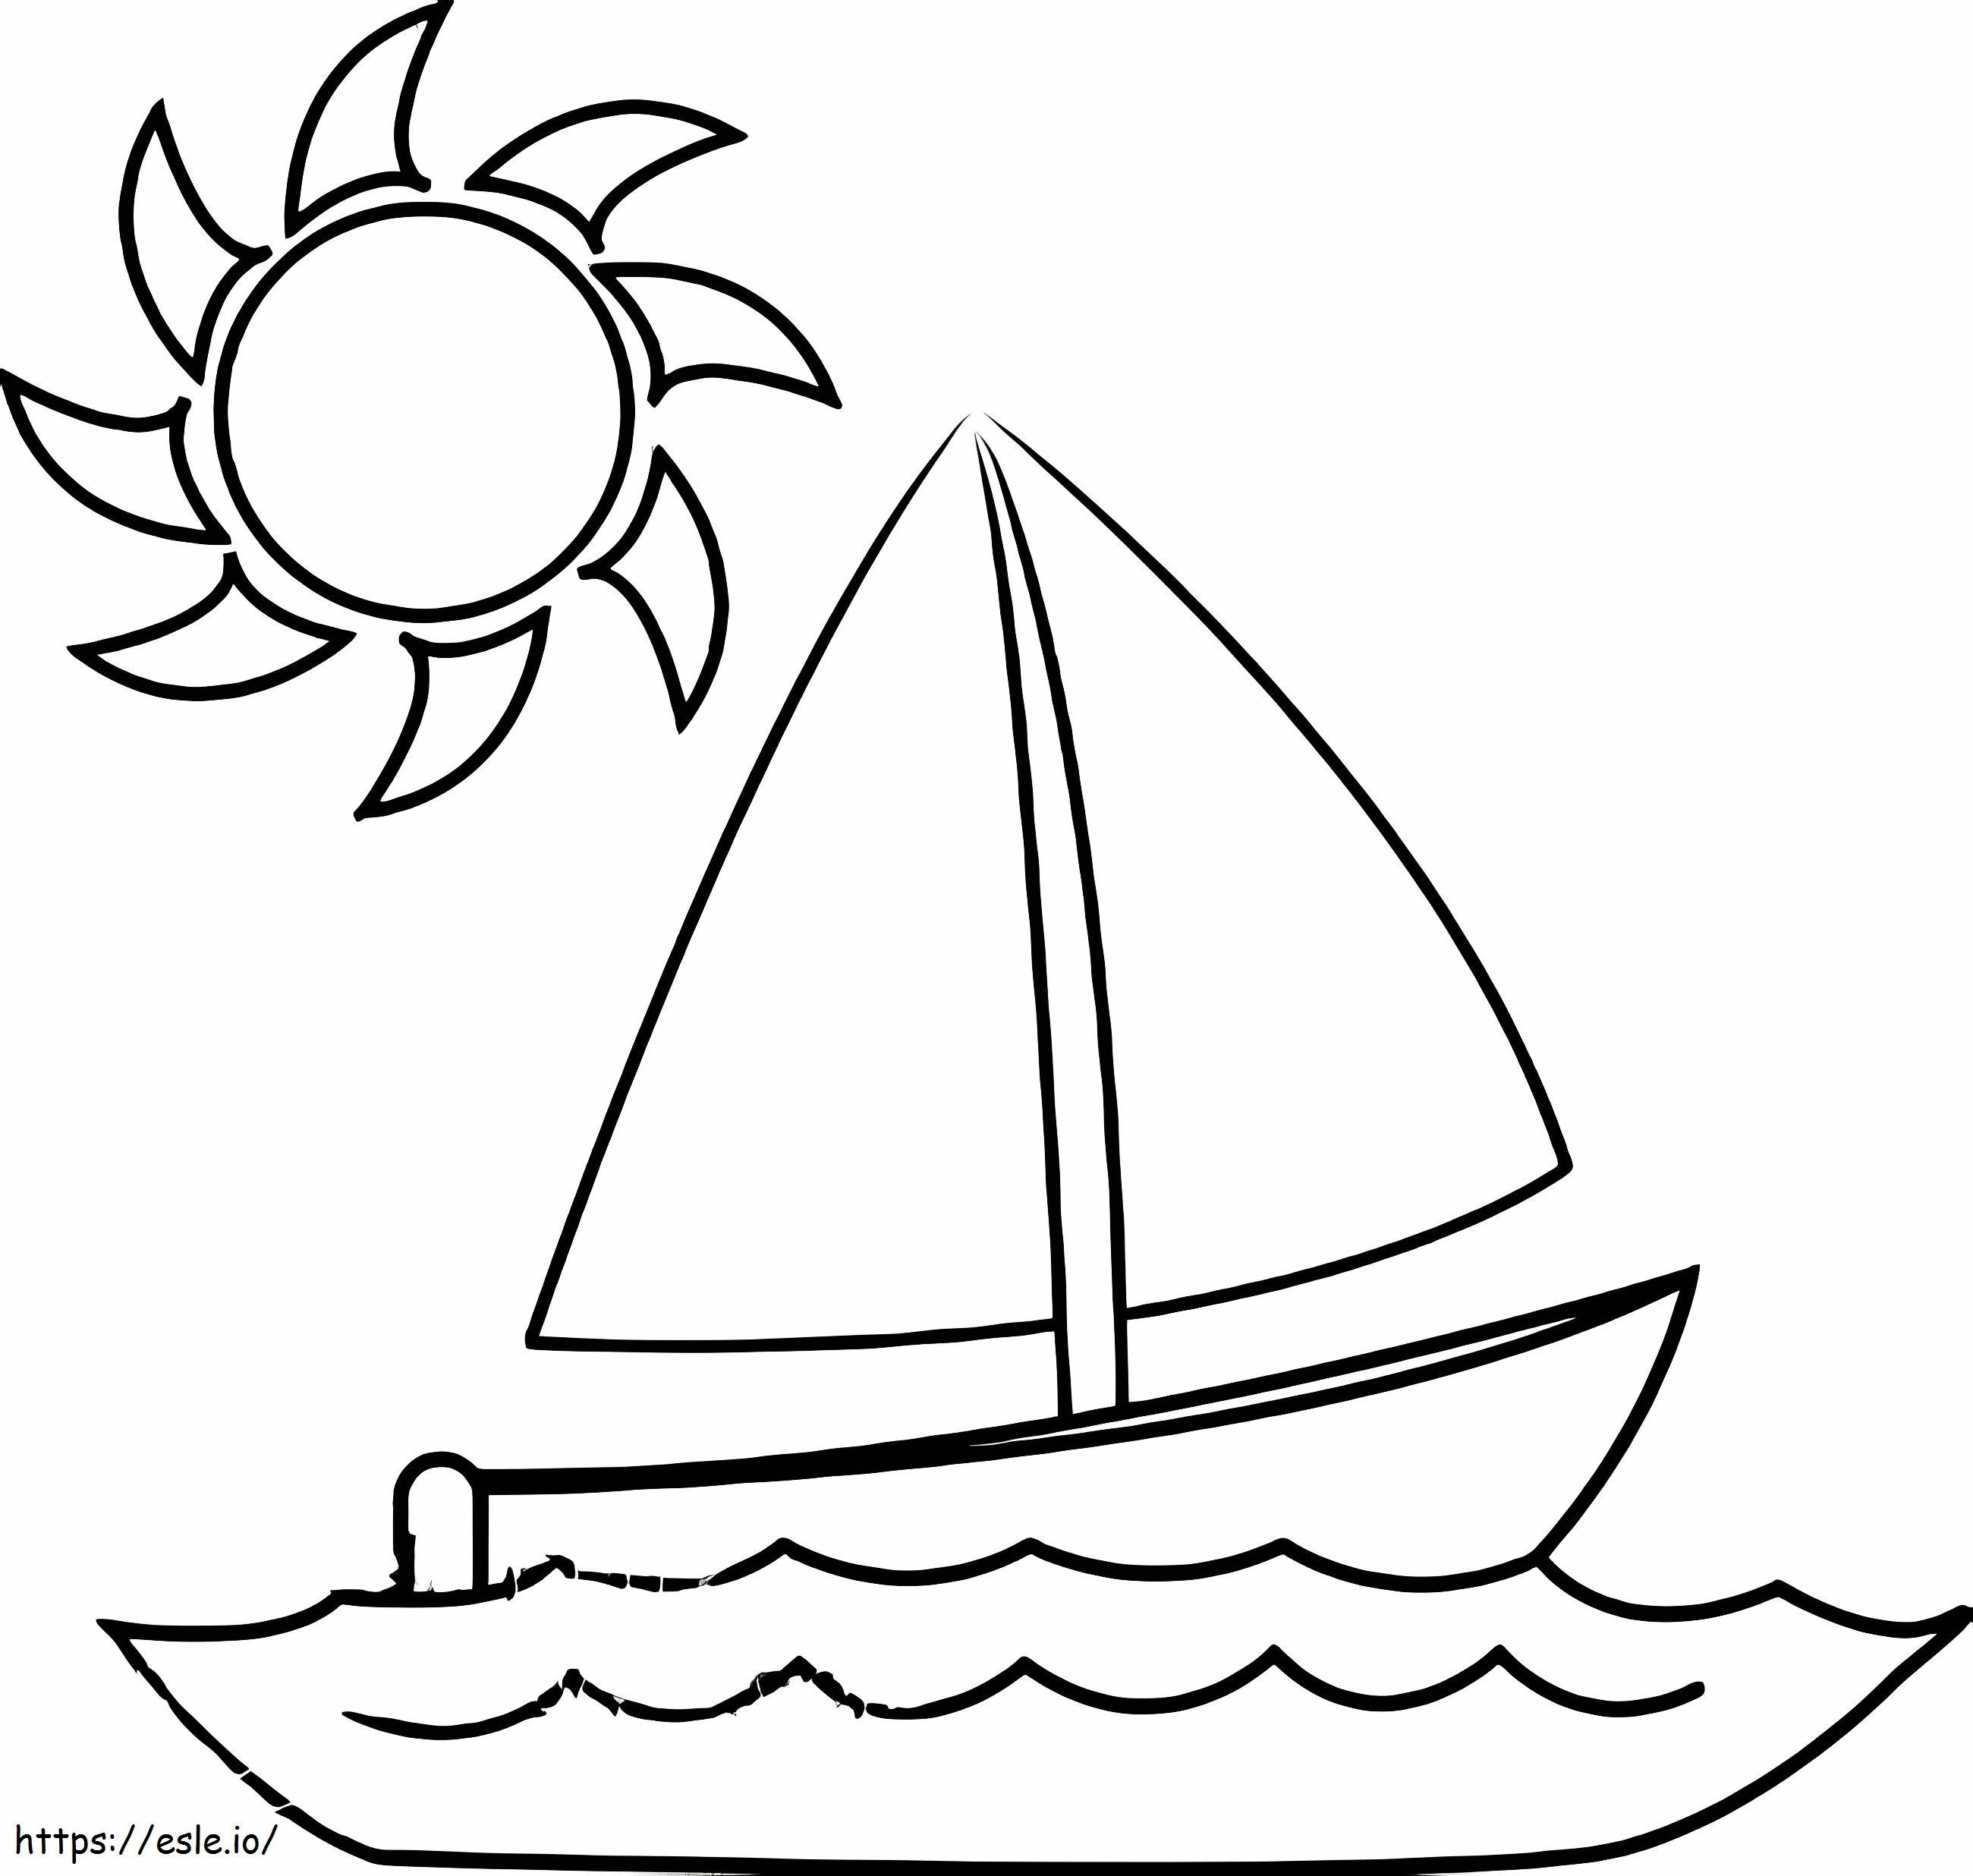 Boat And Sun coloring page